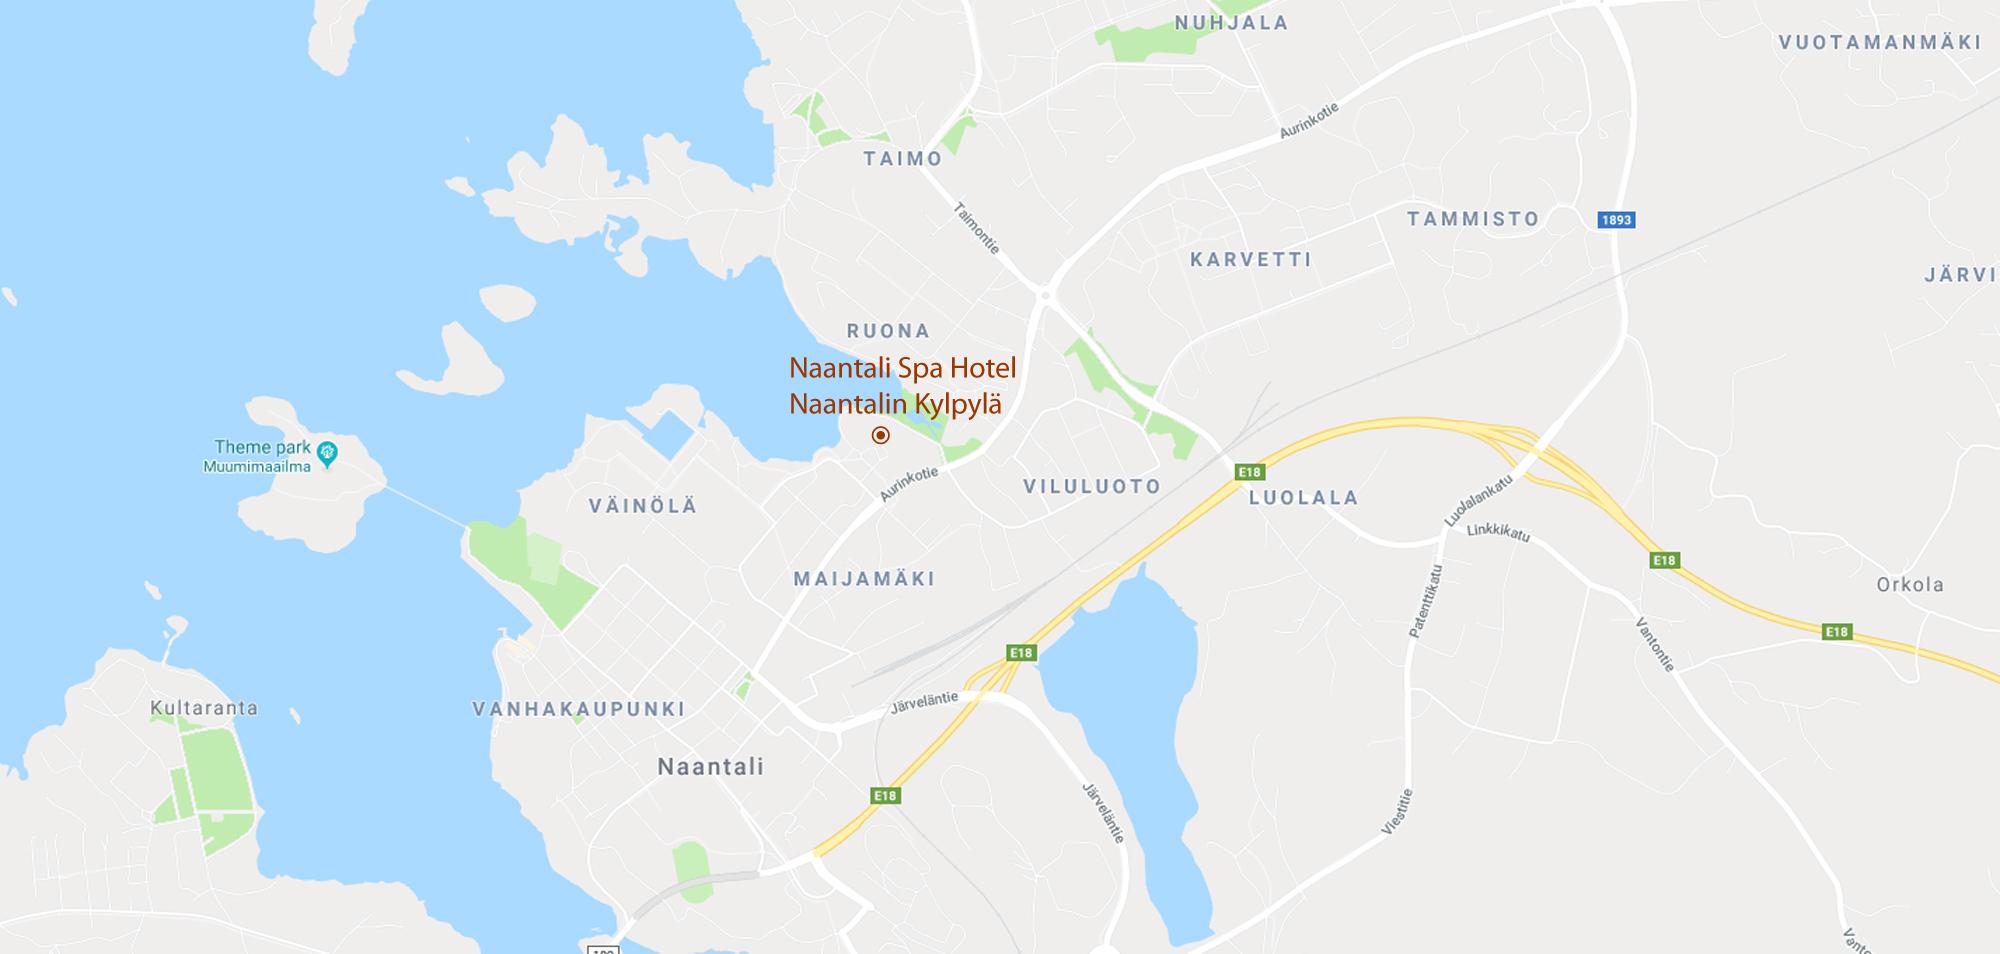 Directions, parking and transports - Naantali Spa & Hotel